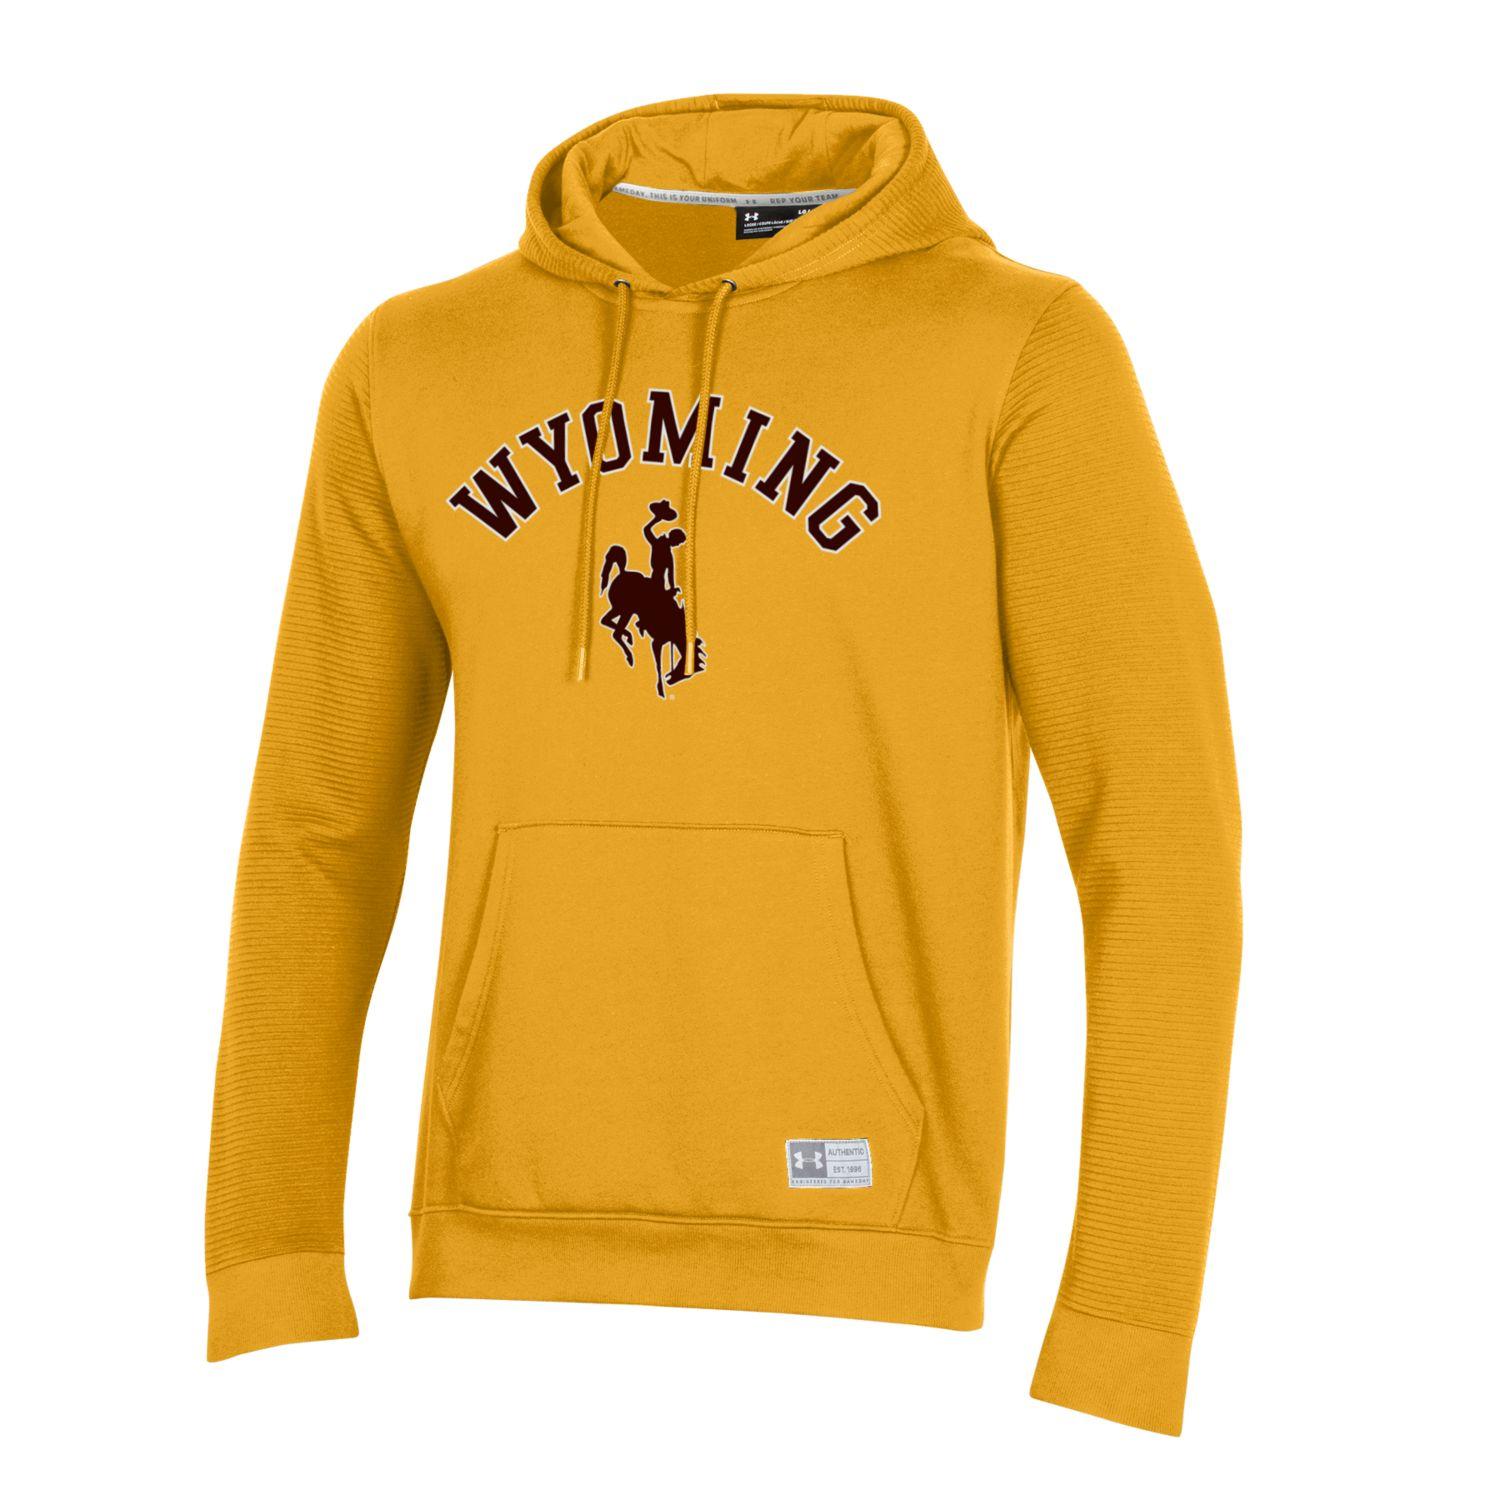 Men’s - Wyoming Cowboys Gear | Brown and Gold Outlet